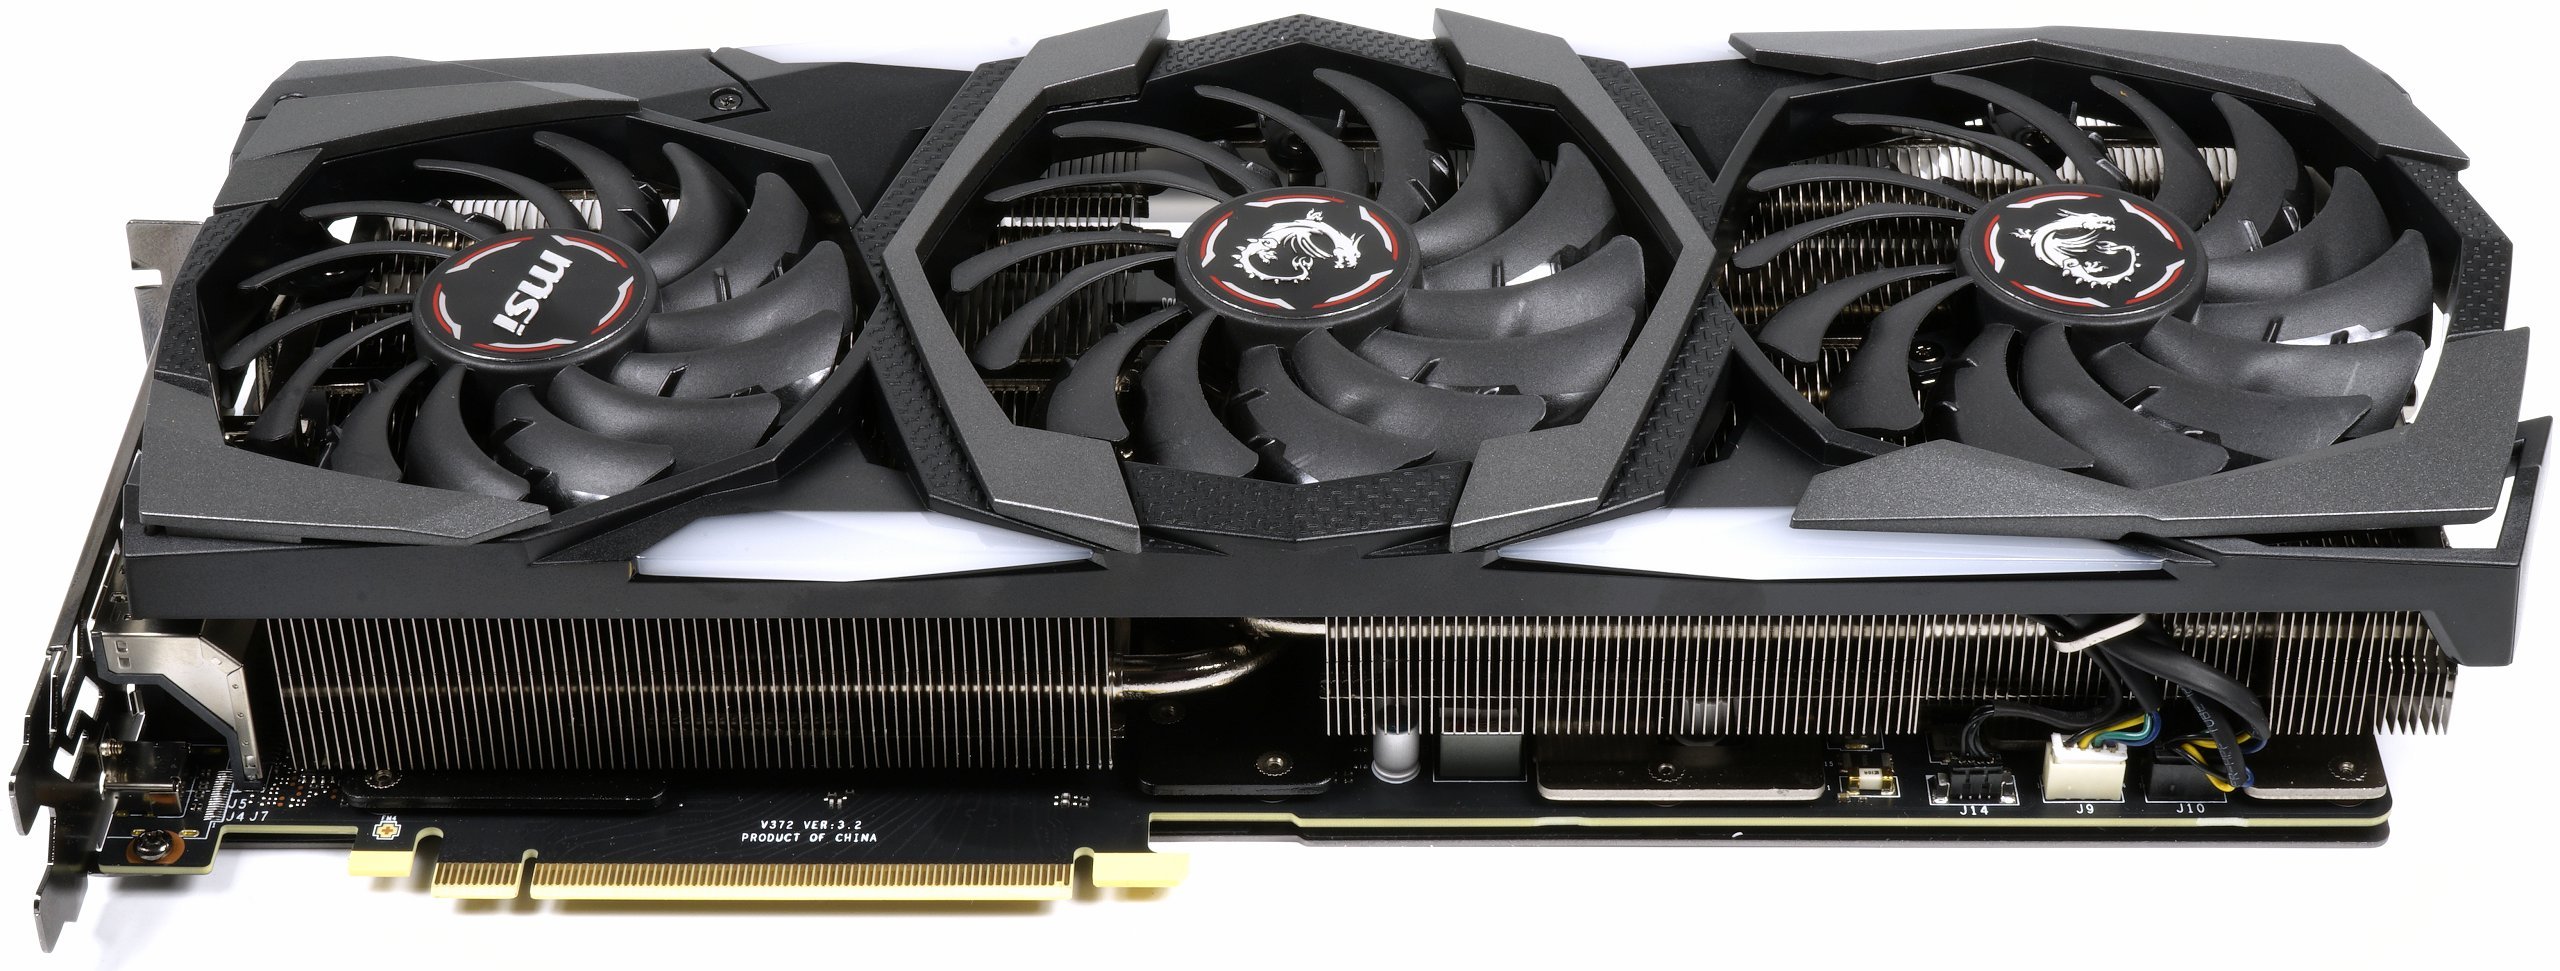 Image 1 : Test : MSI RTX 2080 Gaming X Trio, silencieuse et rapide